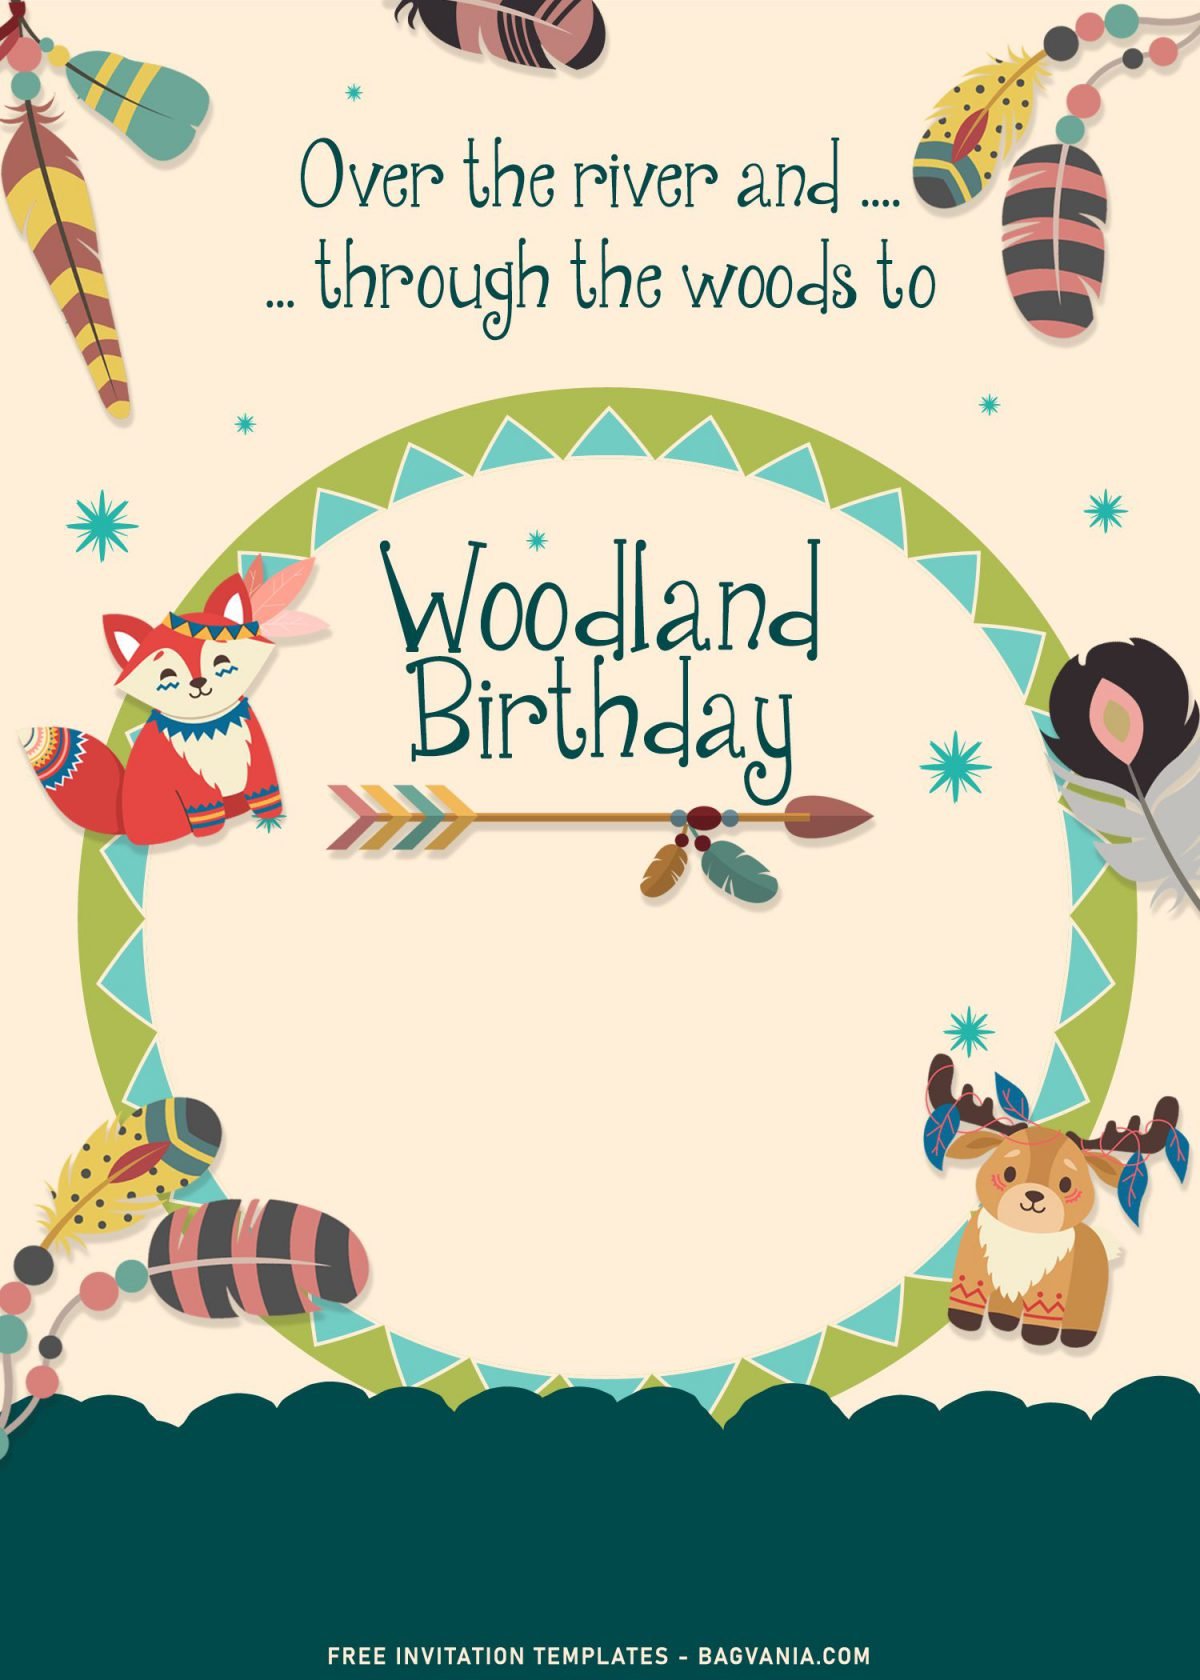 7+ Woodland Birthday Invitation Templates For Your Little Animal Lover Birthday and has baby elk and owl